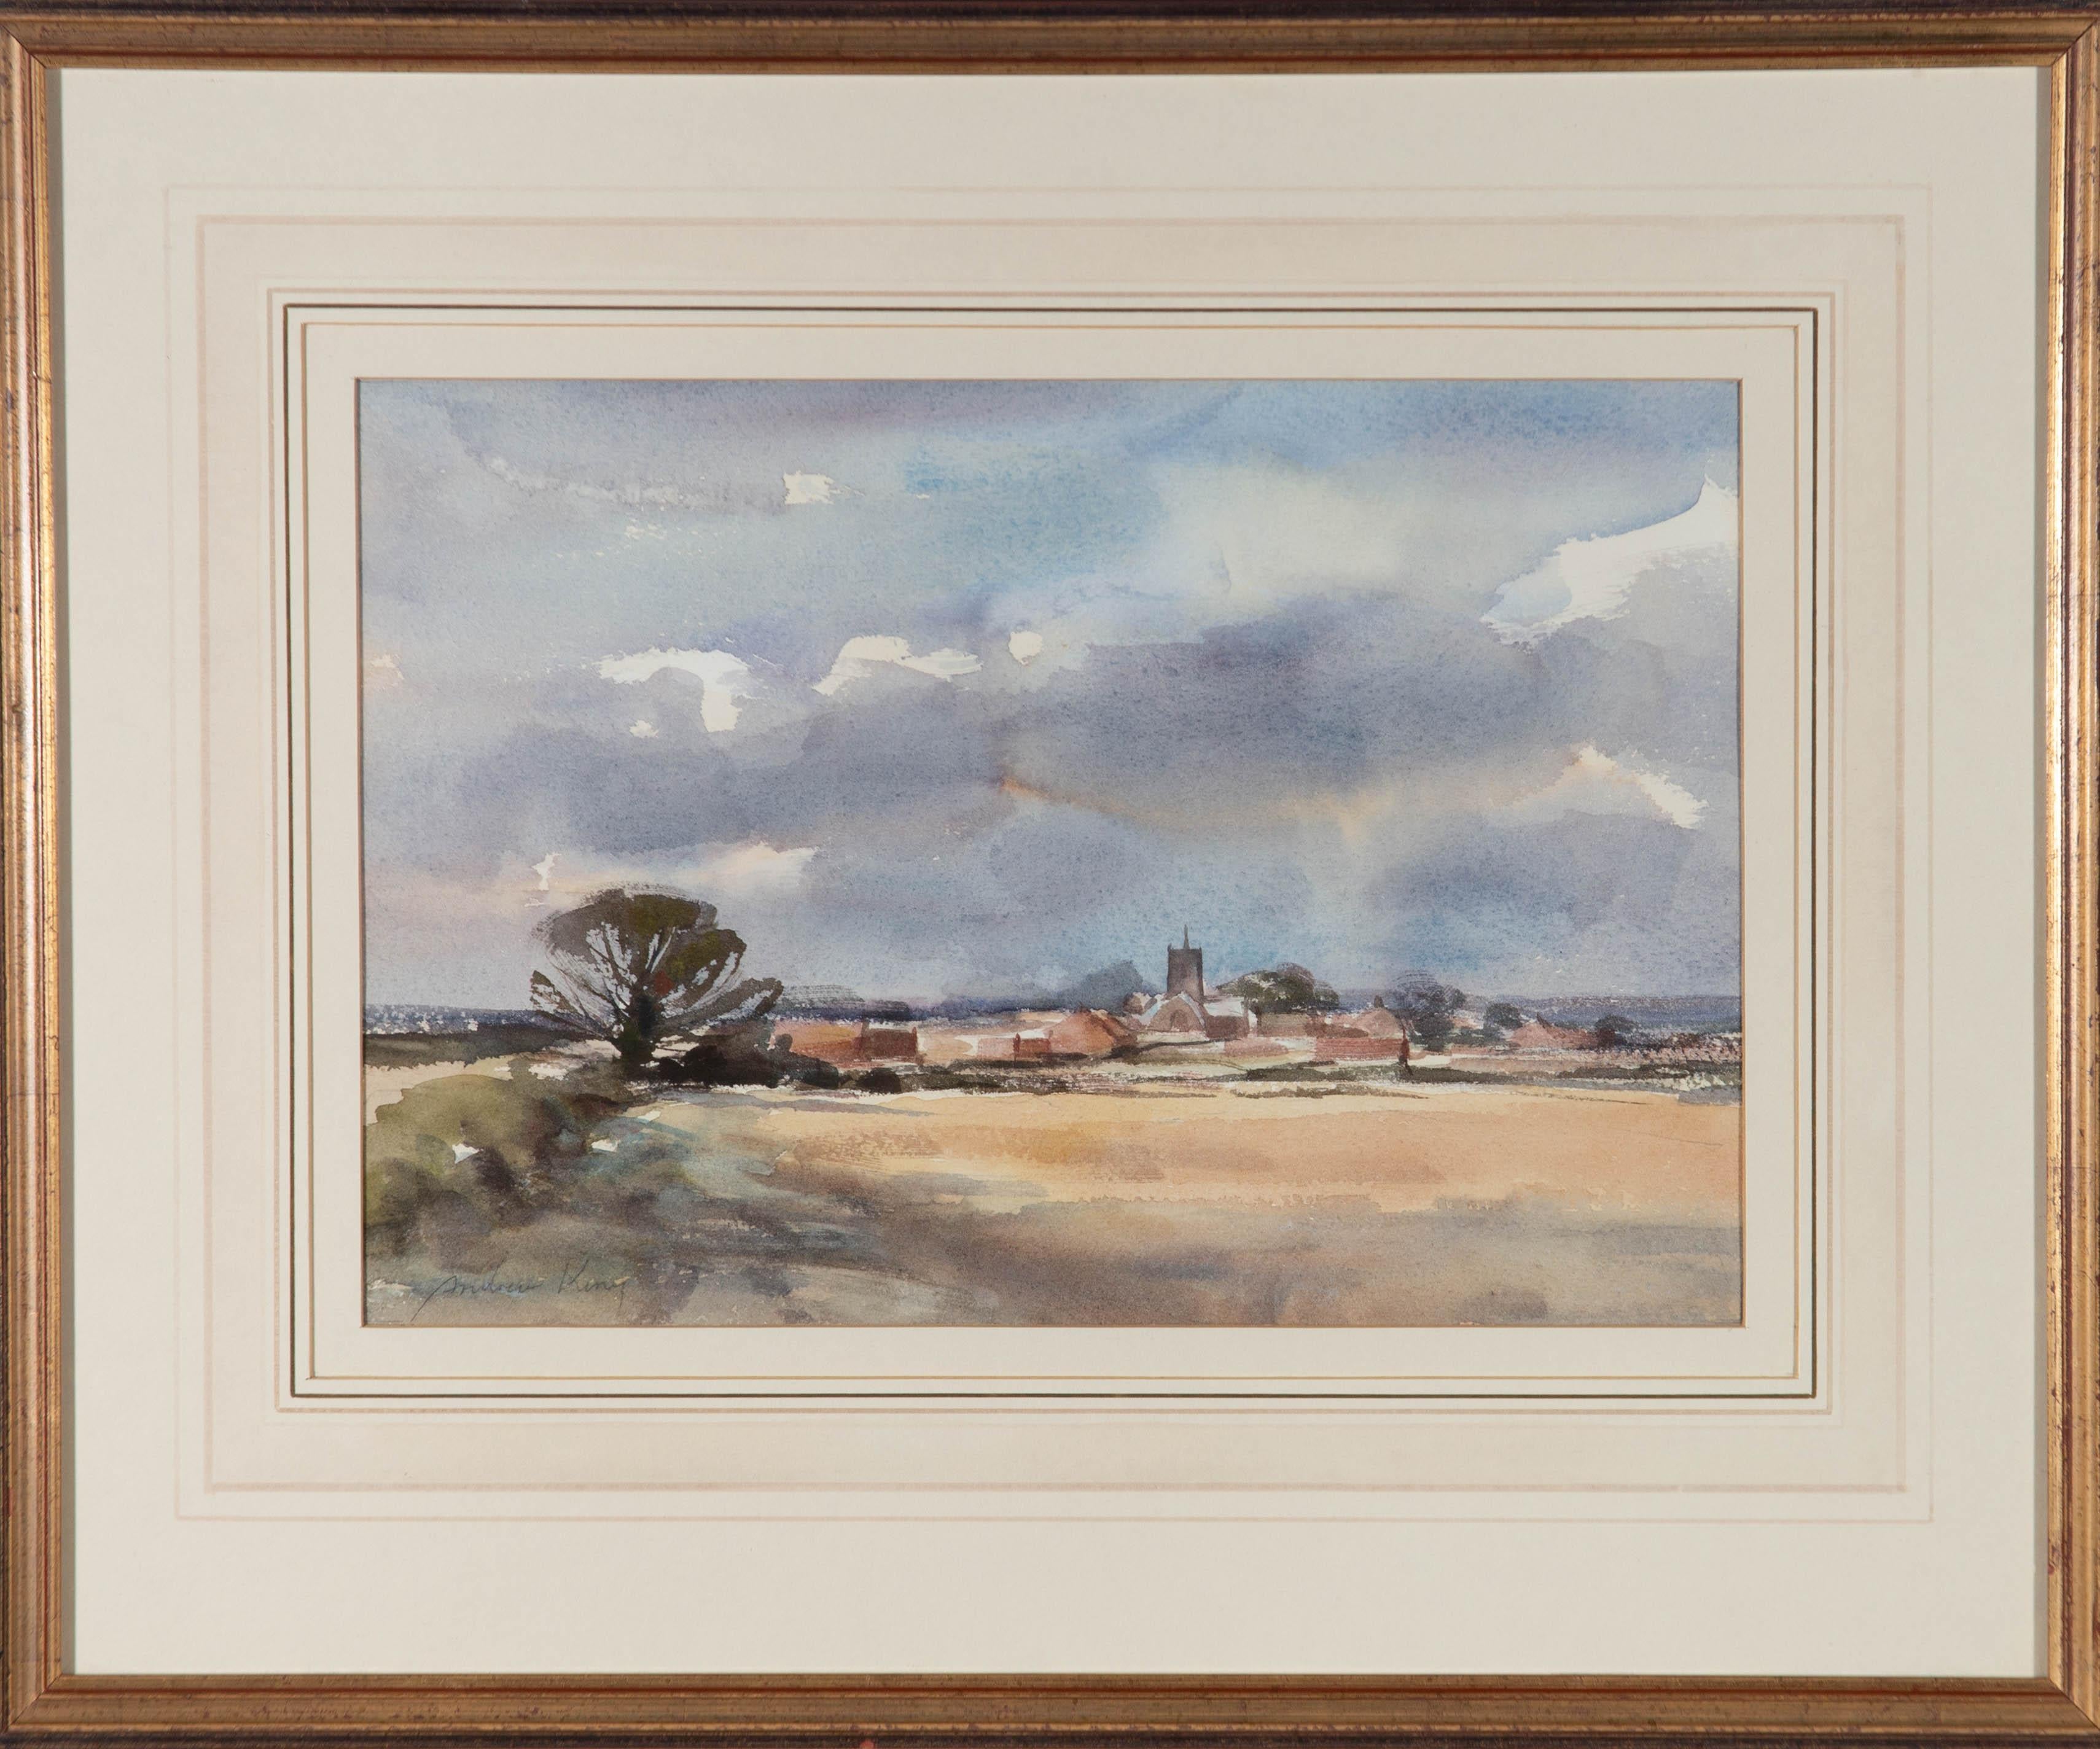 A delicate watercolour scene with a view across the fields and into a small town in the distance. Well presented in a double card mount with border and a gilt frame. Signed to the lower left. On wove.
